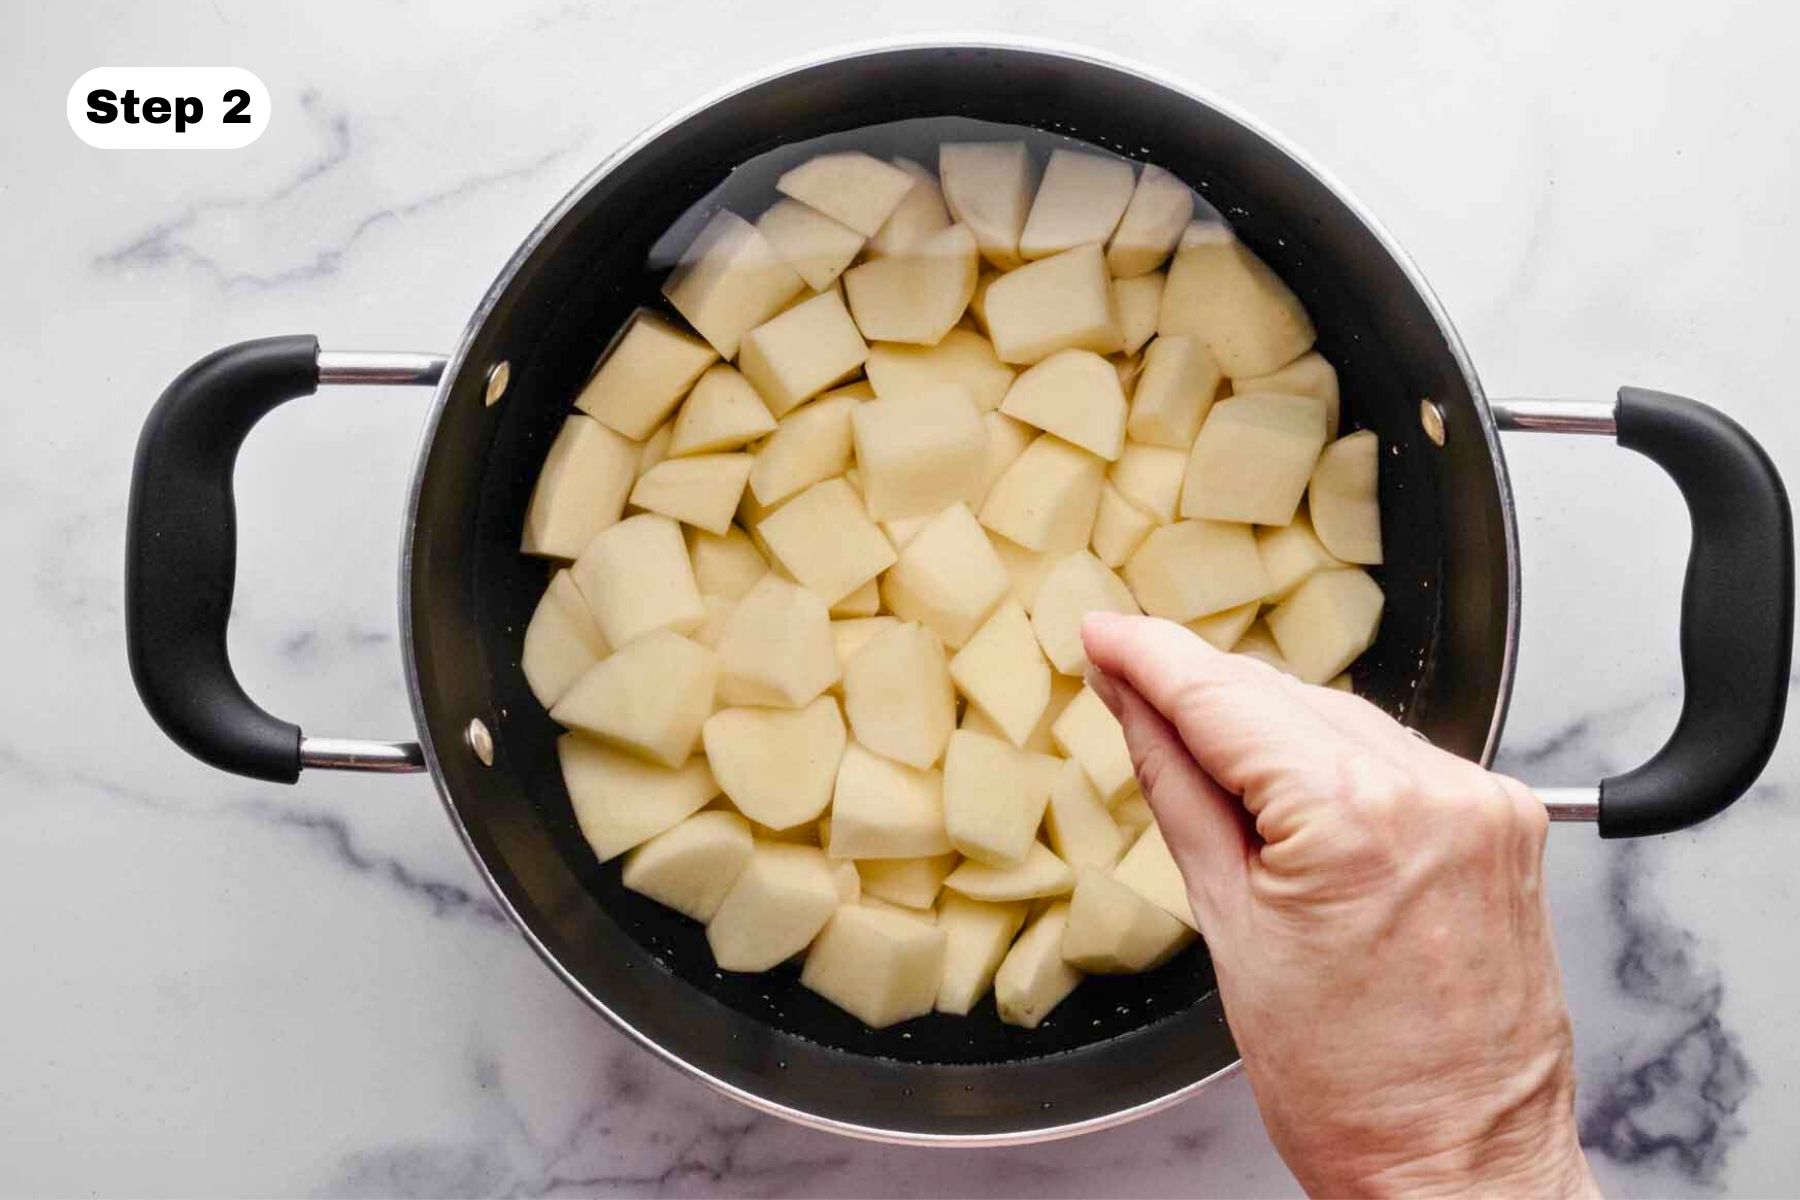 Potatoes covered with cold water in a large pot. A pinch of salt is being sprinkled over the top.